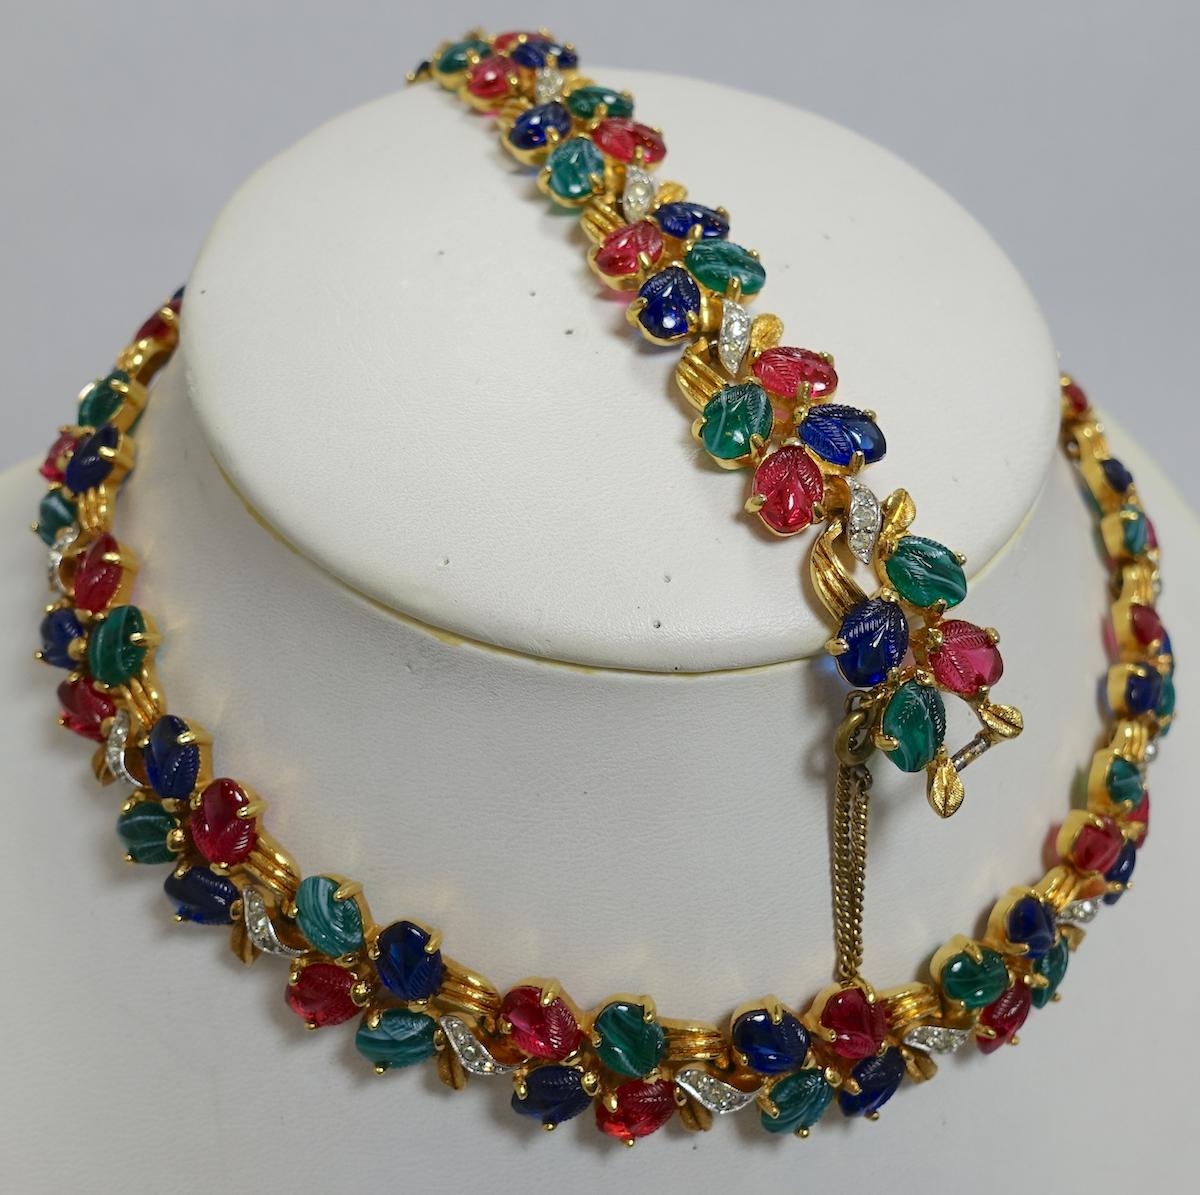 I believe this may be a vintage unsigned Mazer set designed with tutti-frutti glass stones in red, green and blue with crystal accents in a gold tone setting.  The necklace measures 15” x 5/8” with a fold-over clasp. The matching bracelet measures